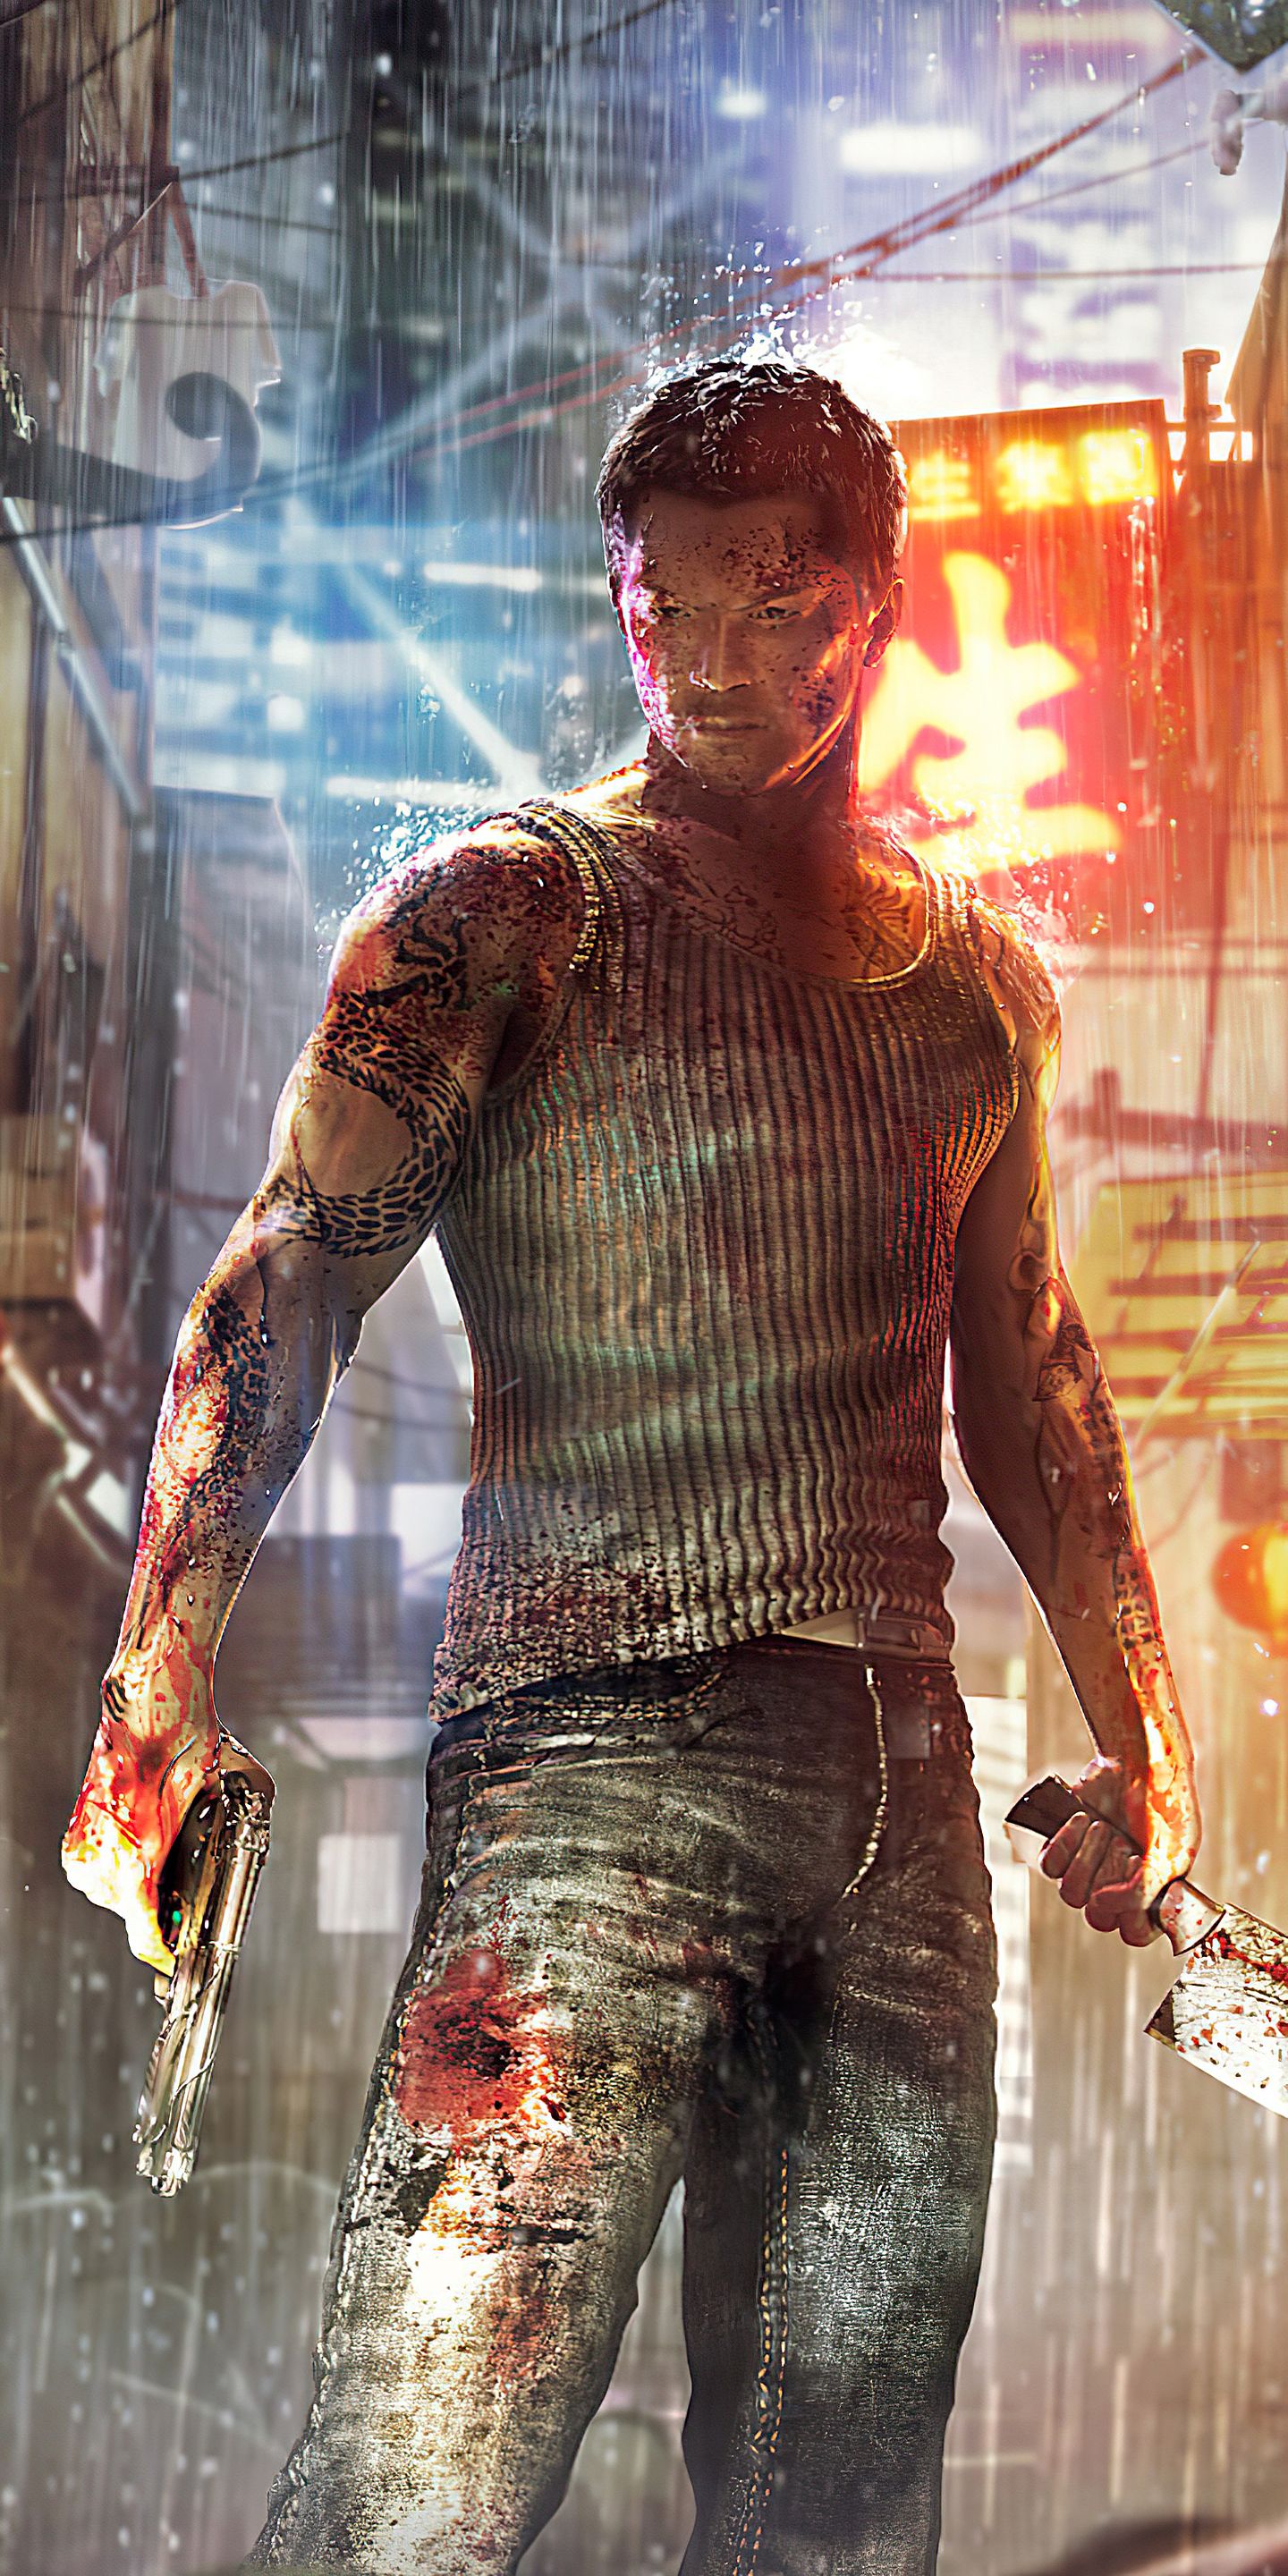 video game, sleeping dogs